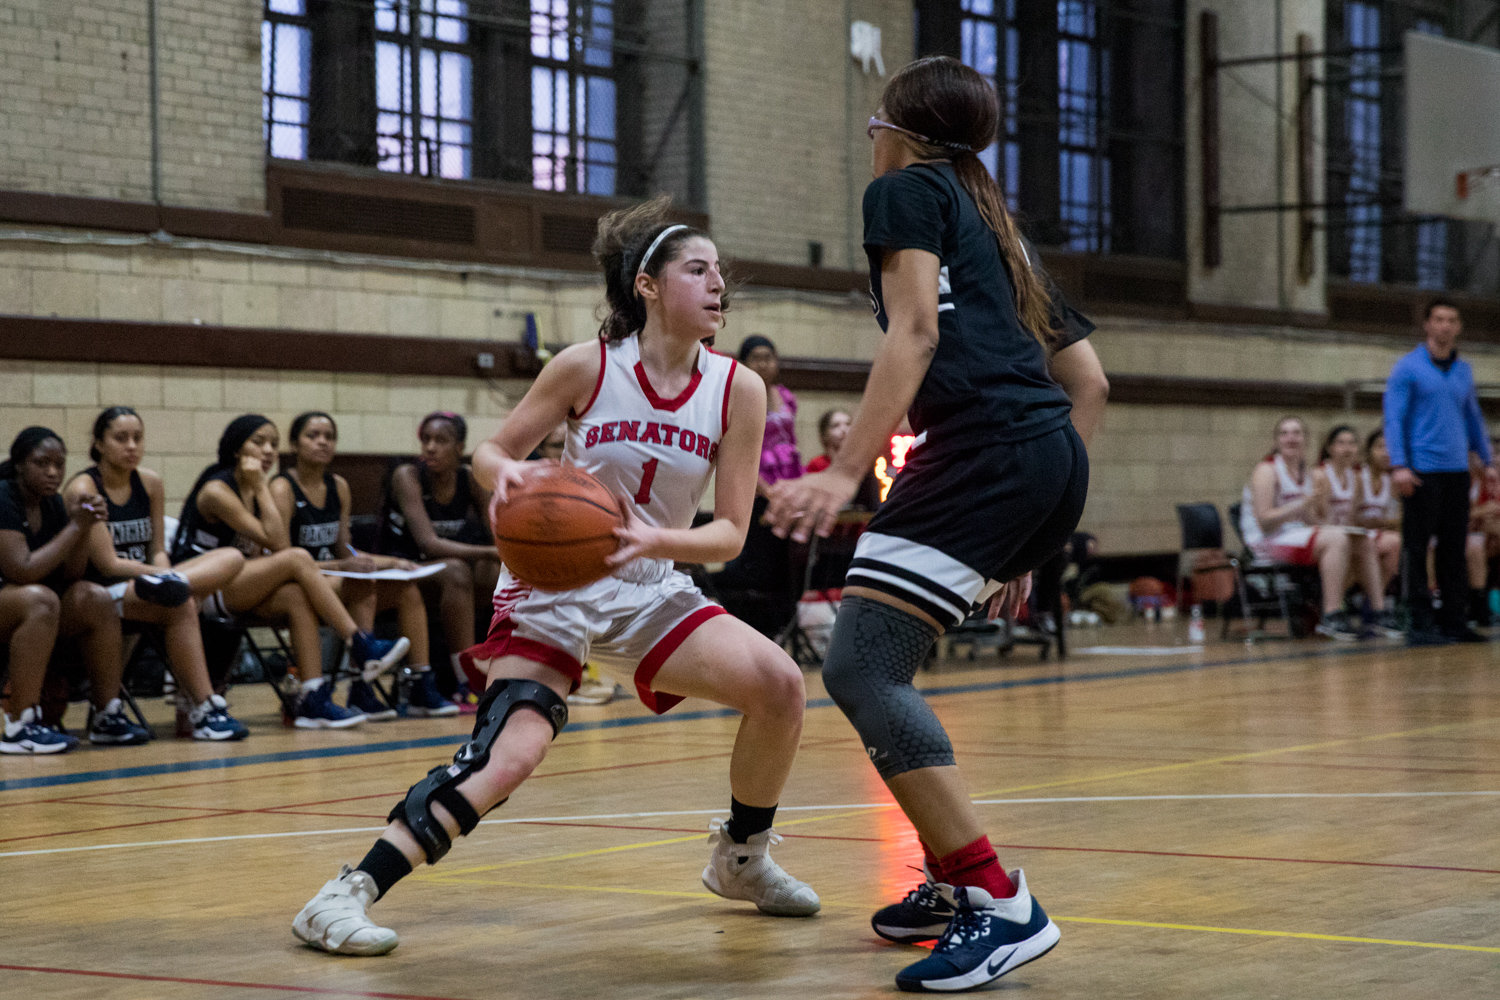 American Studies’ senior guard Jacqui Harari scored 16 points in what turned out to be her final game for the Senators, a 67-55 playoff loss to Achievement First Brooklyn.